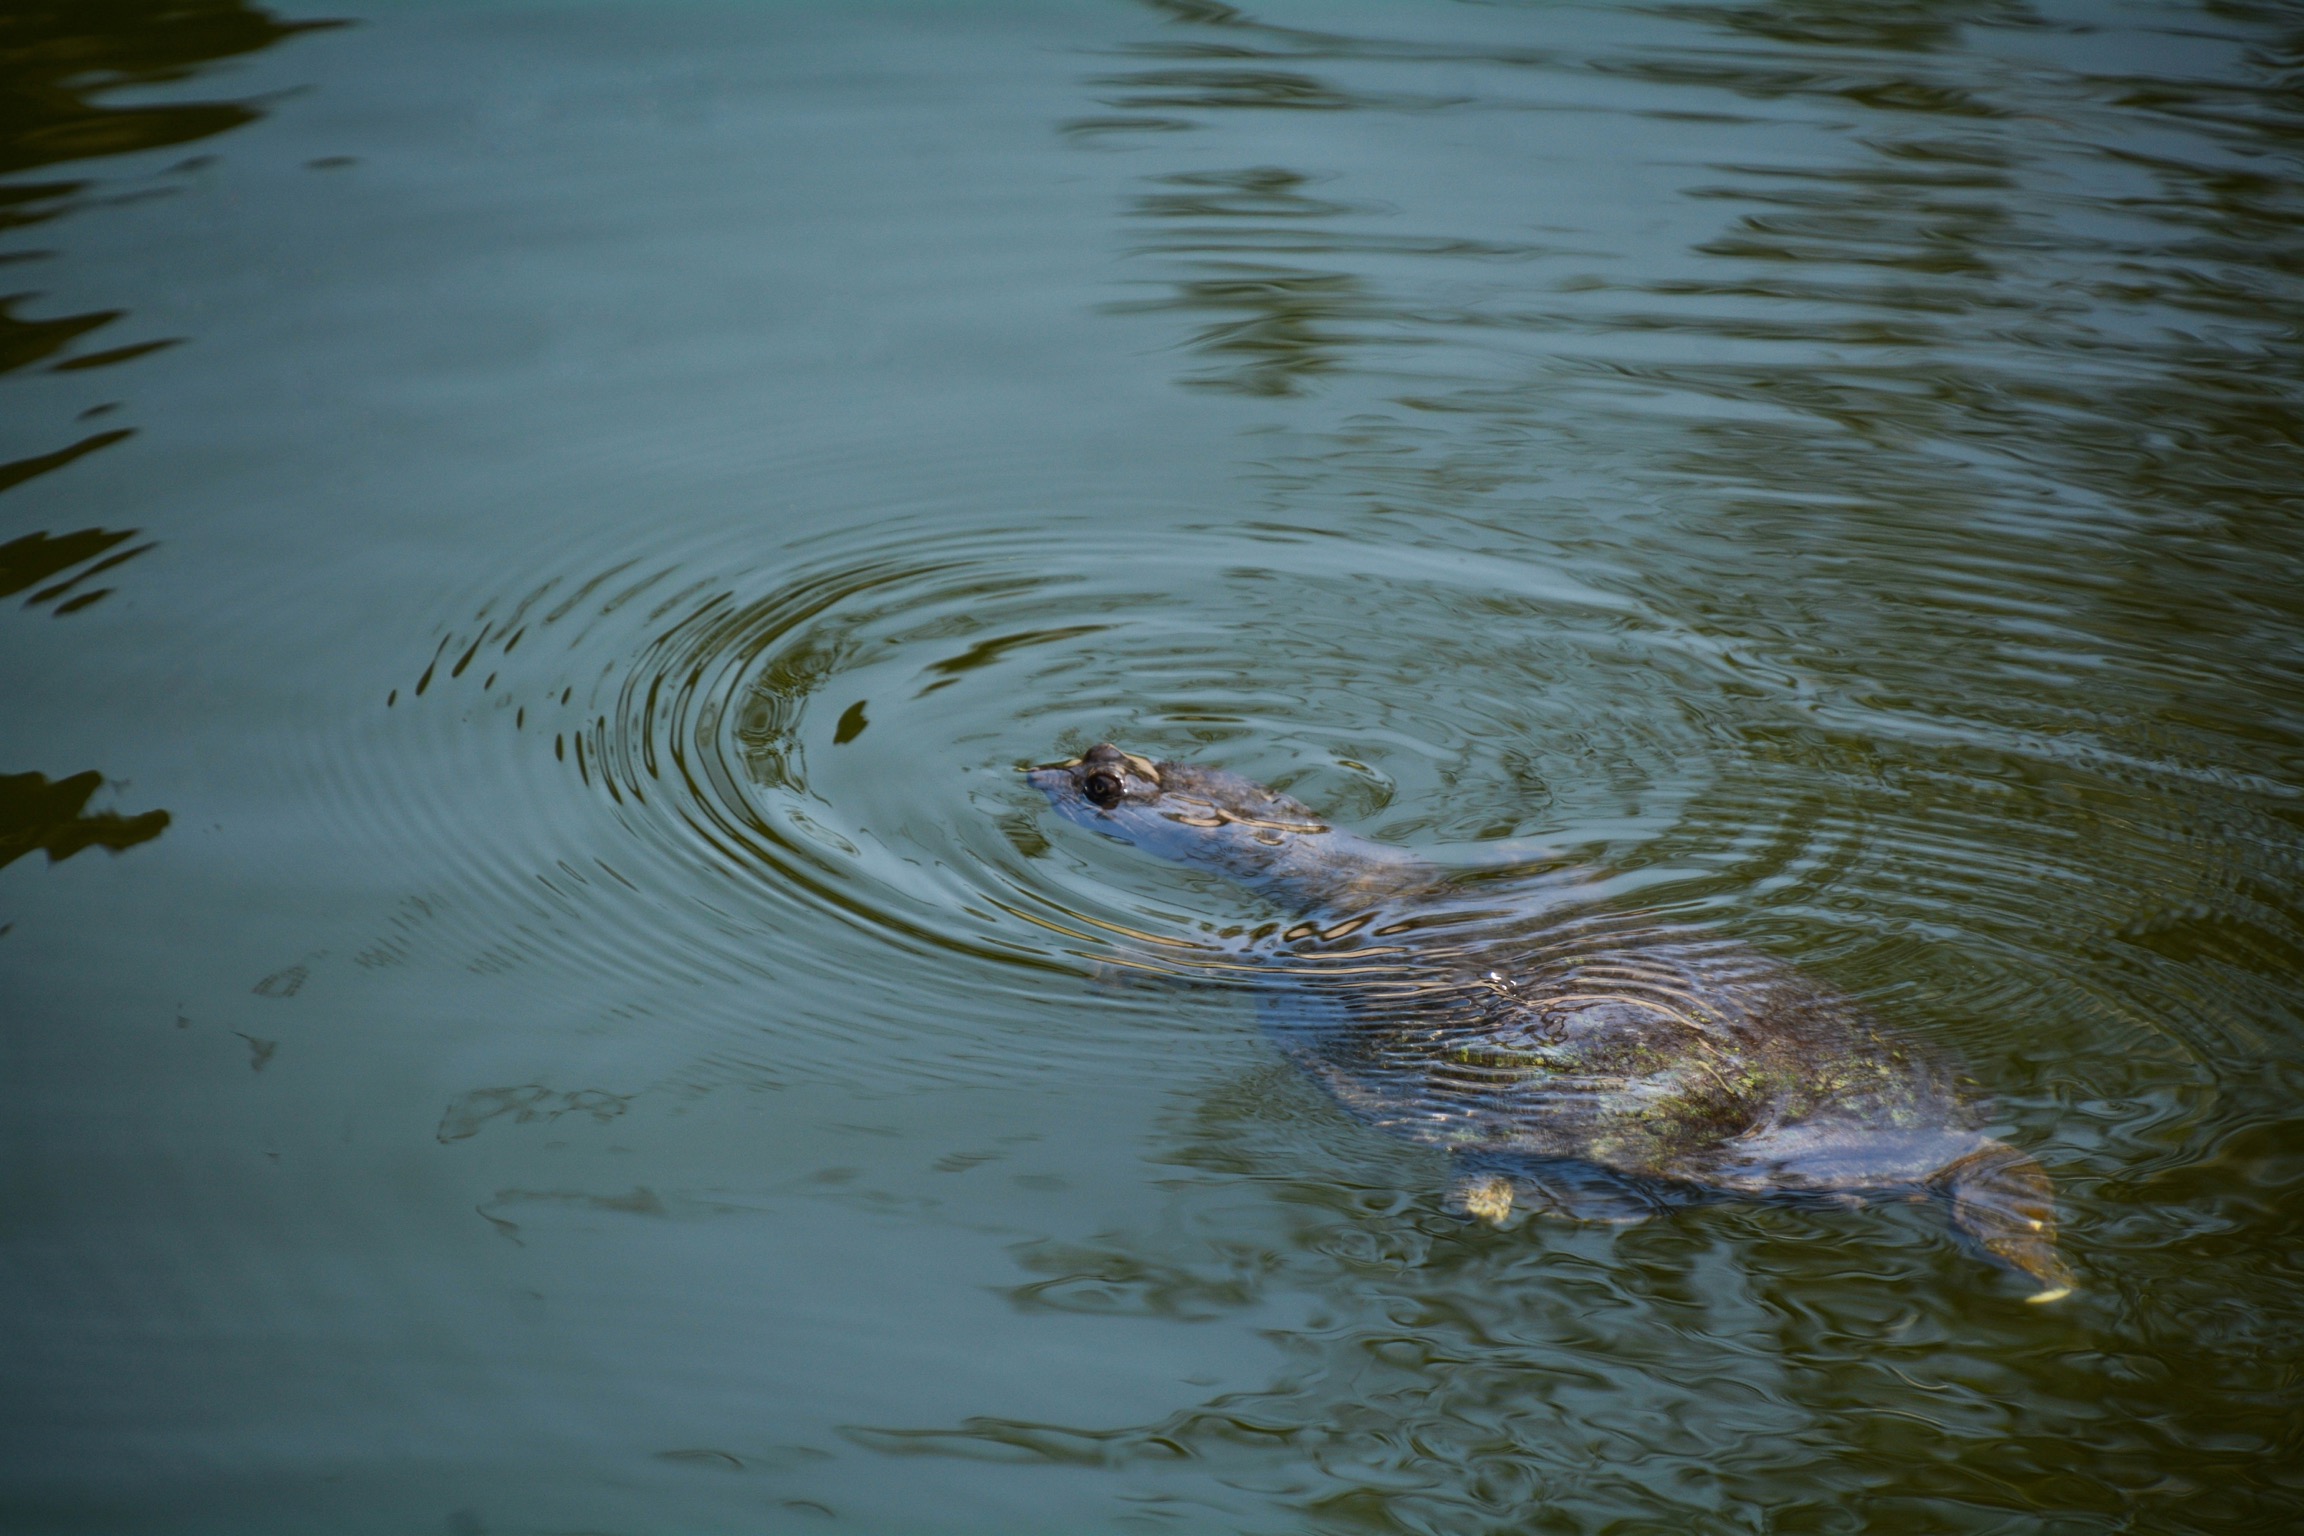 A turtle dived in a water resource